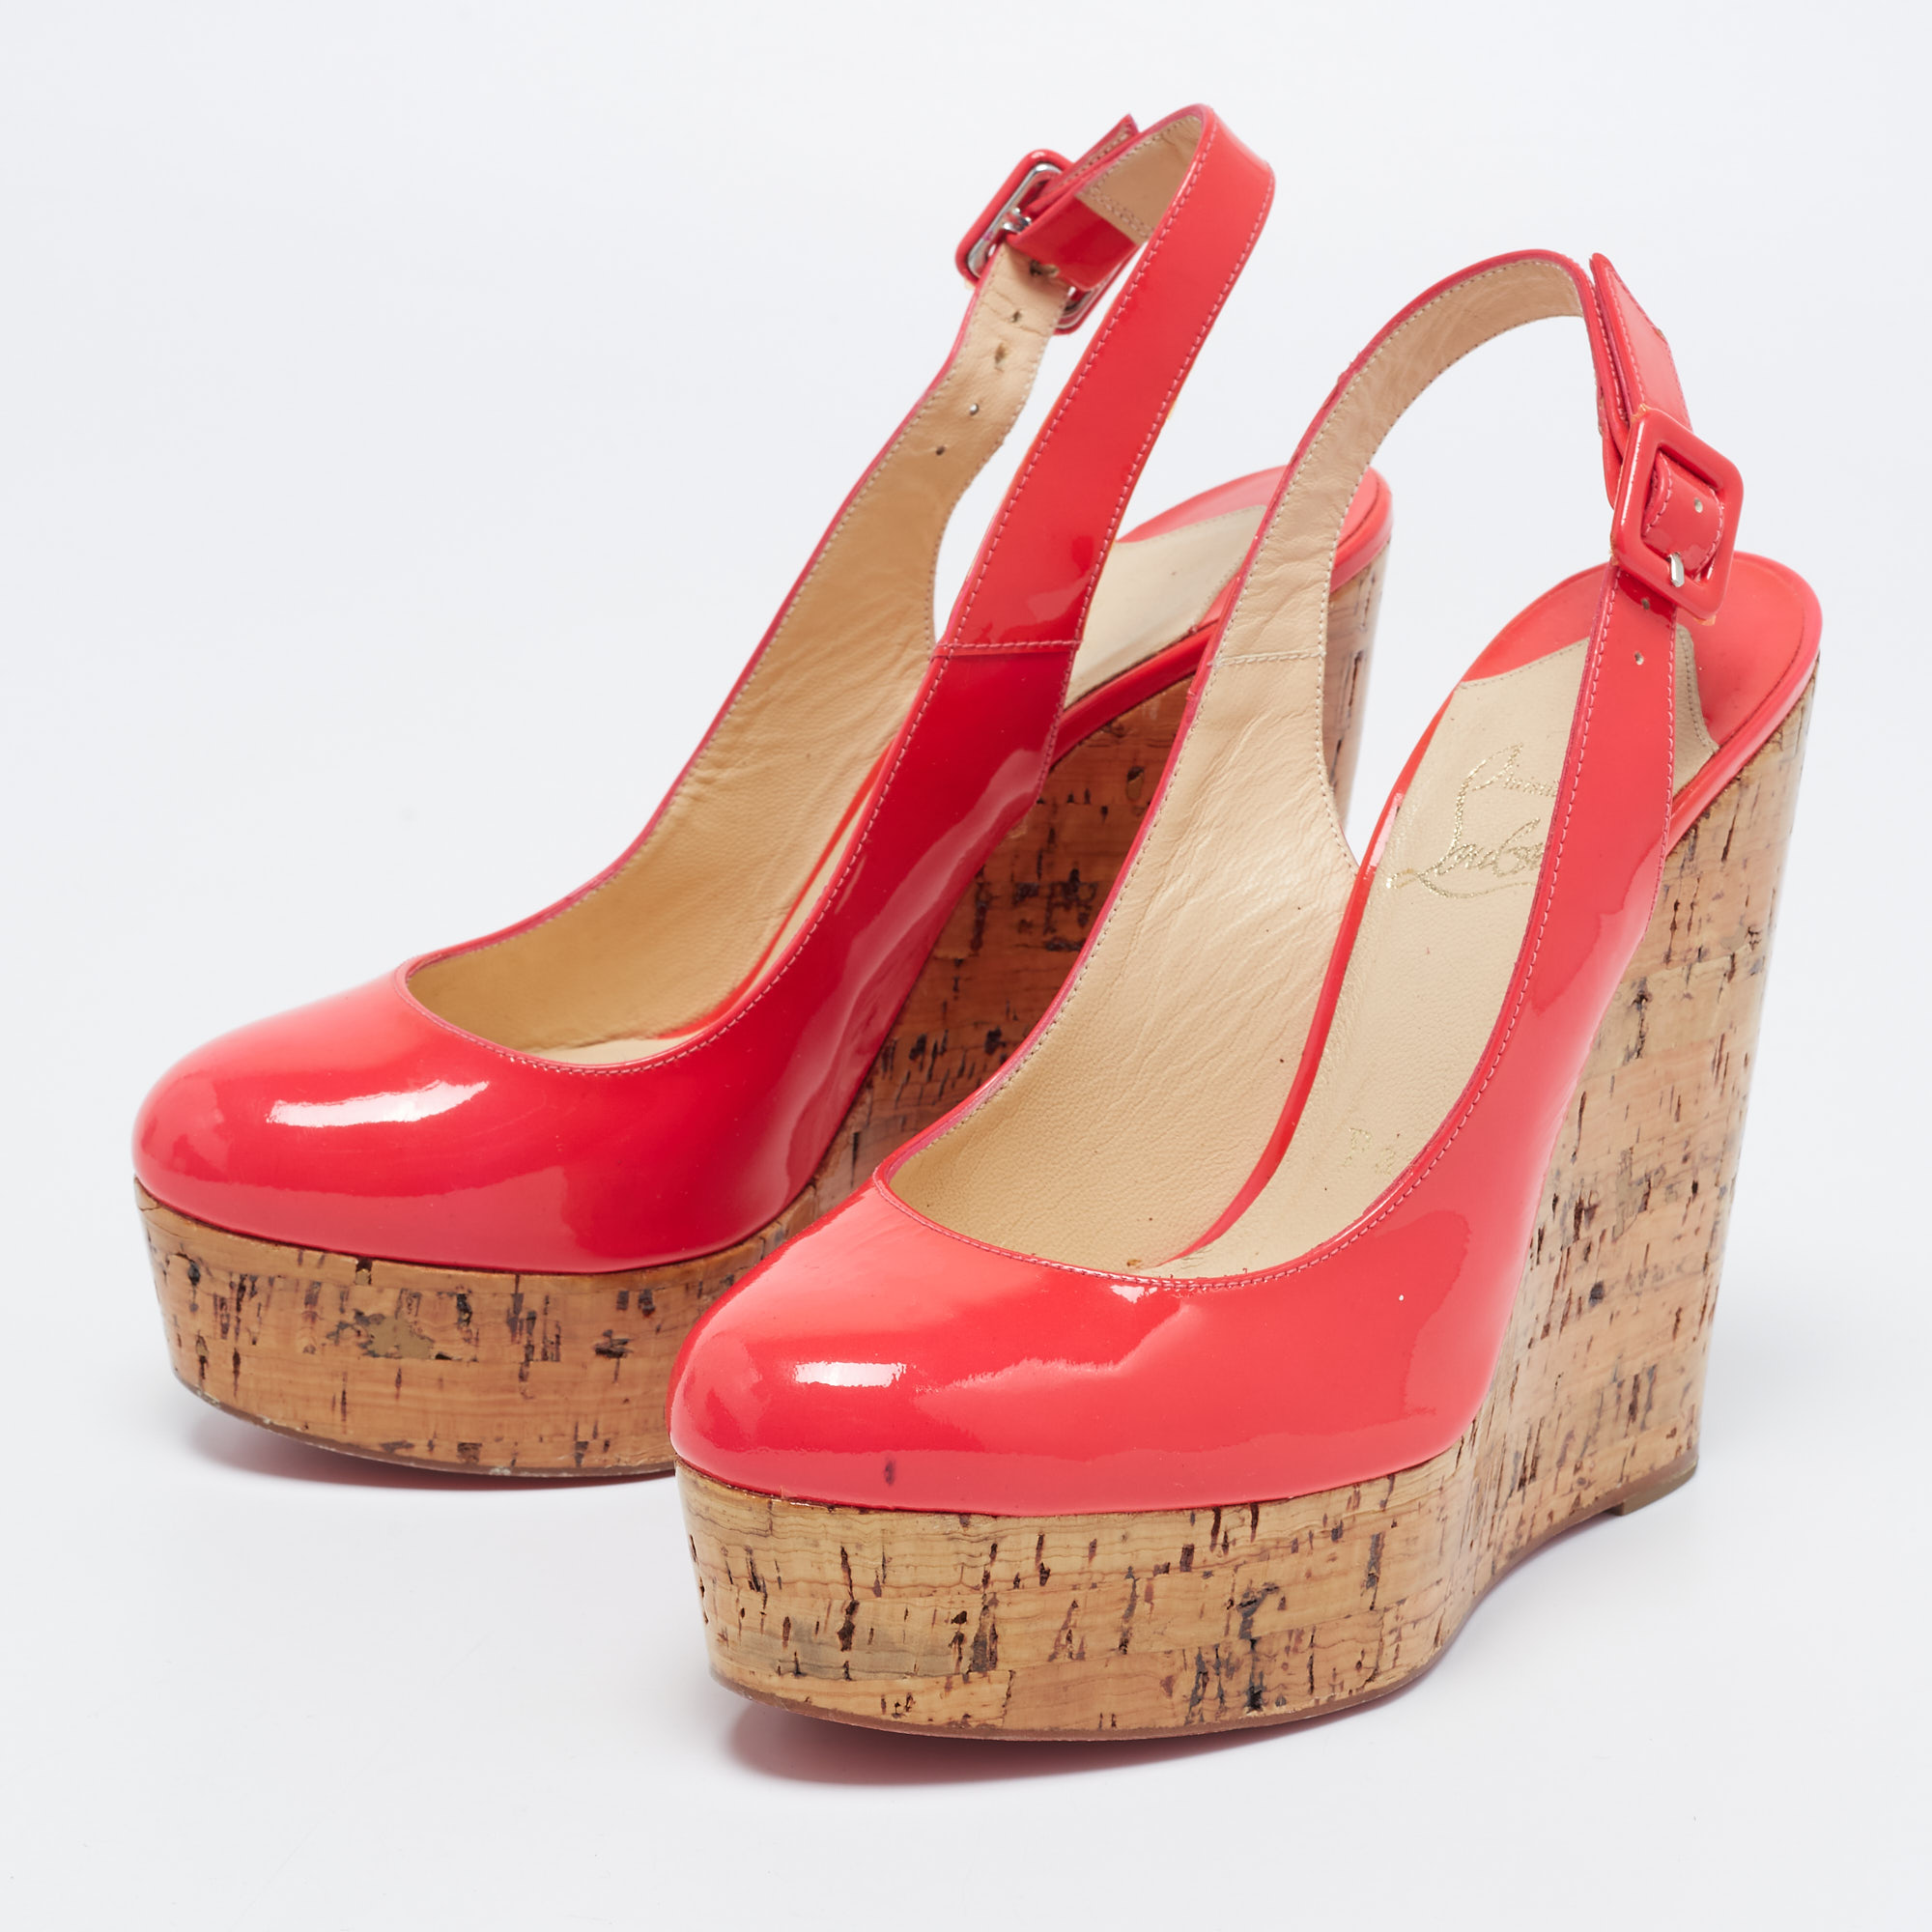 

Christian Louboutin Neon Pink Patent Leather Cork Wedge Slingback Pumps Size